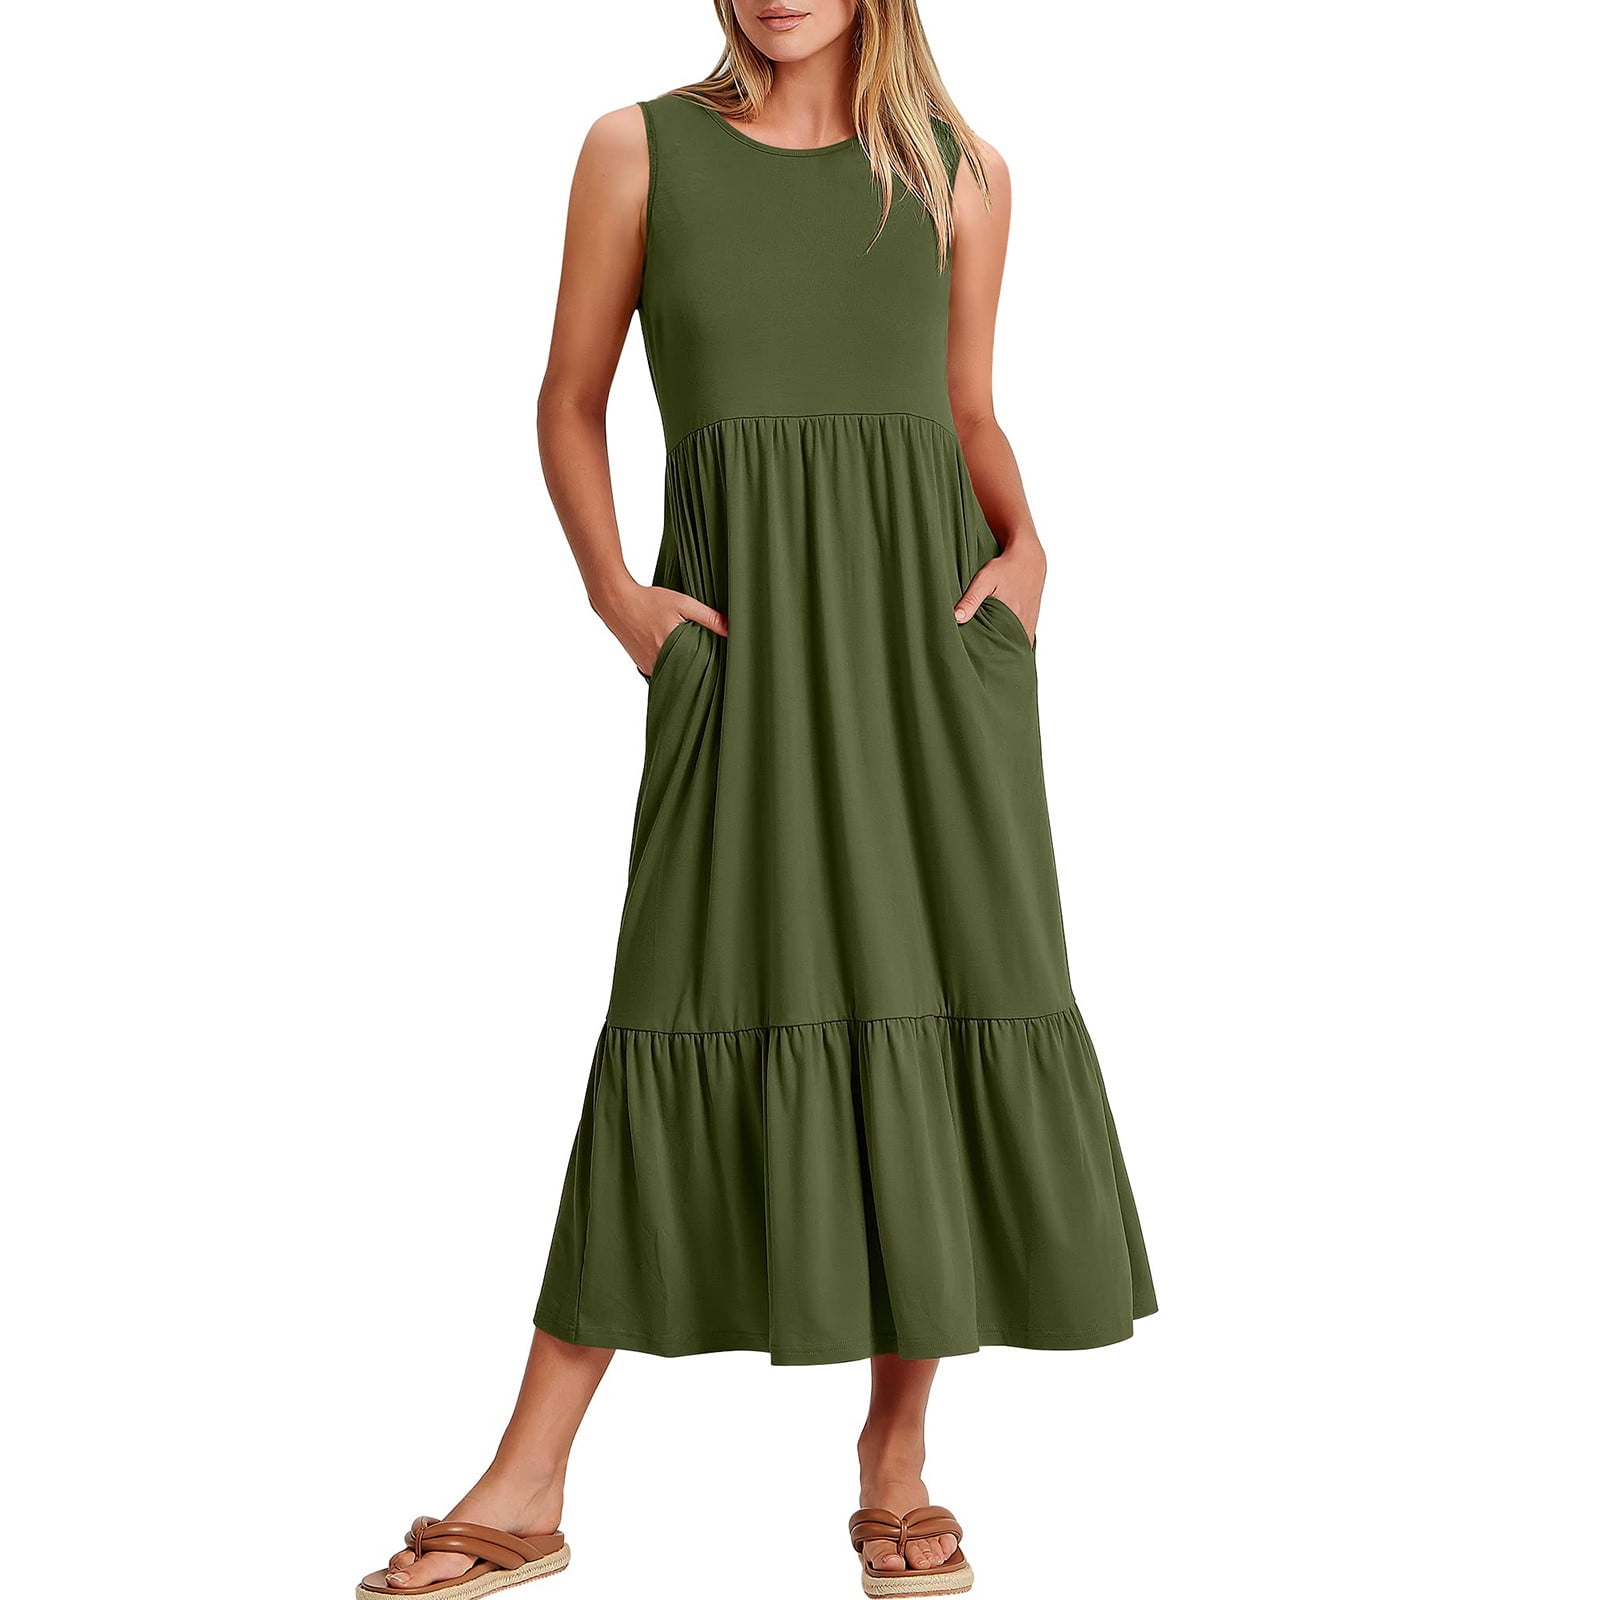 Wenini Summer Dresses for Women 2023, Womens Casual Loose Maxi Sundress Long Dresses Sleeveless Summer Beach Dress with Pockets #Flash Sales Today